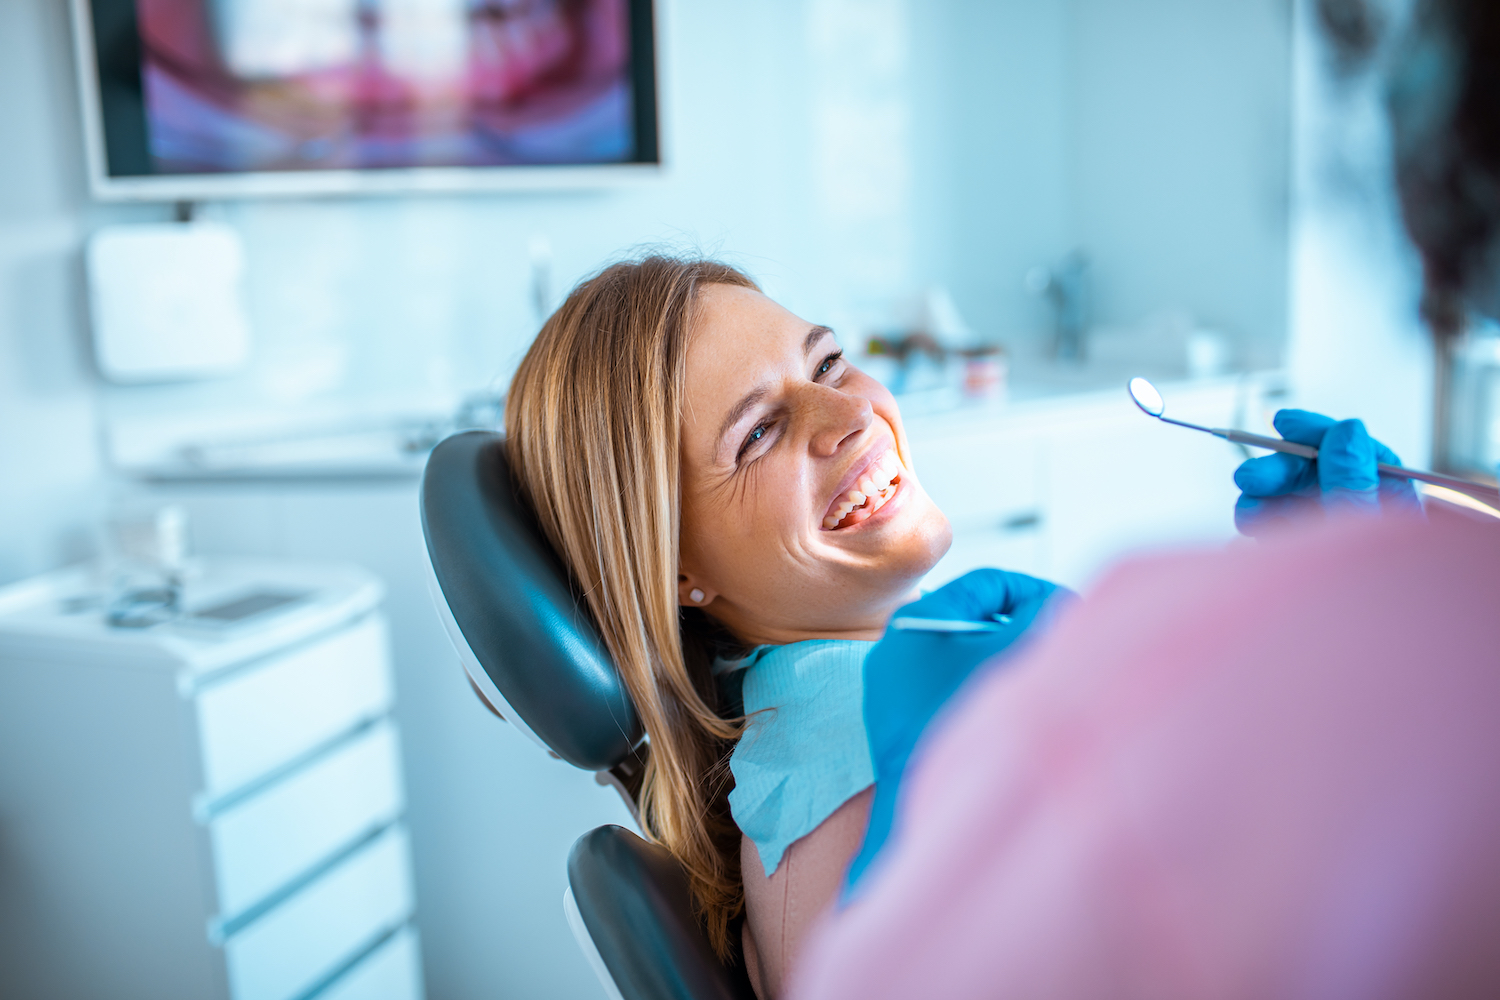 Blonde woman smiles while sitting in a dental chair at the dentist for her routine checkup and cleaning